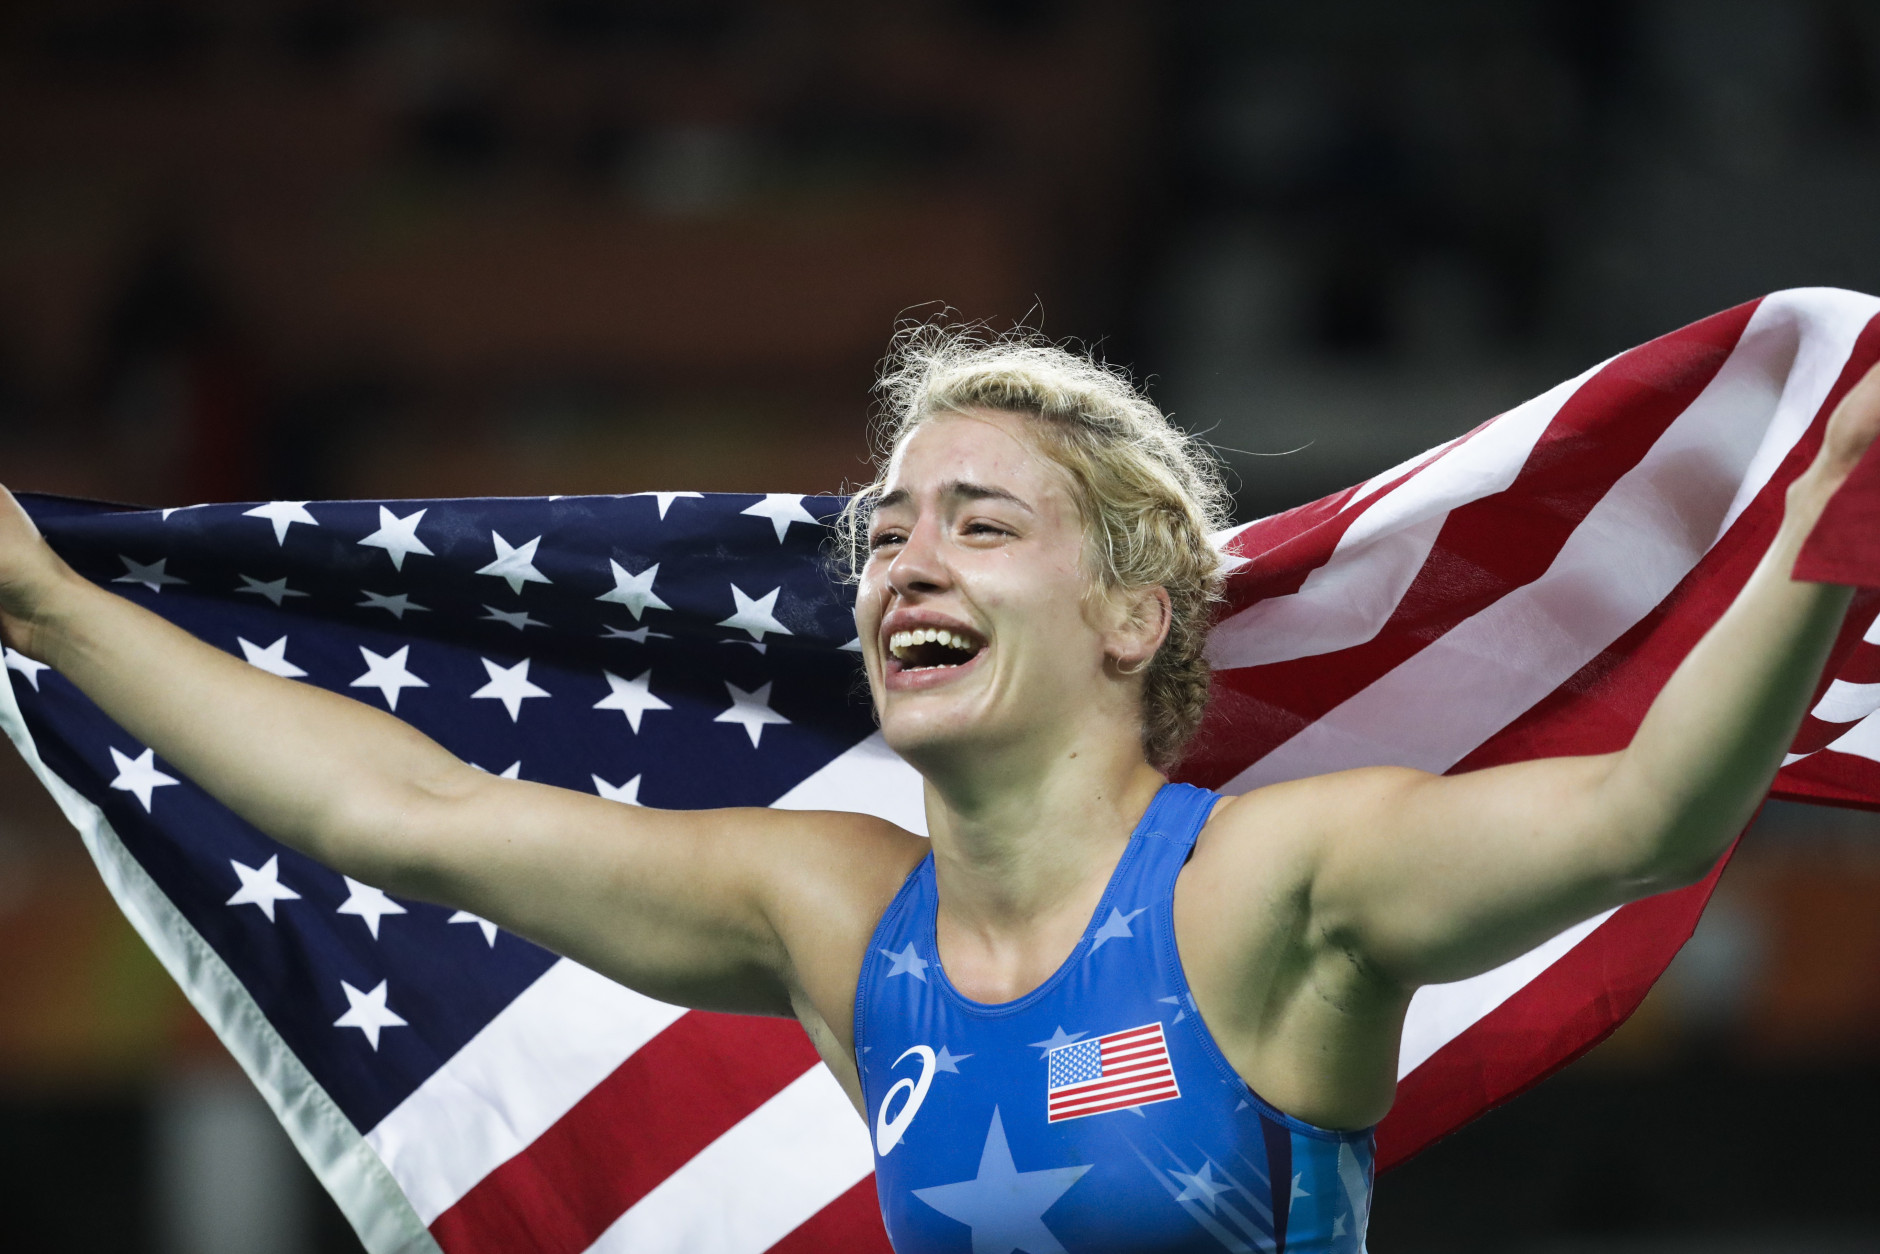 United States' Helen Louise Maroulis celebrates after winning the gold medal during the women's 53-kg freestyle wrestling competition at the 2016 Summer Olympics in Rio de Janeiro, Brazil, Thursday, Aug. 18, 2016. (AP Photo/Markus Schreiber)